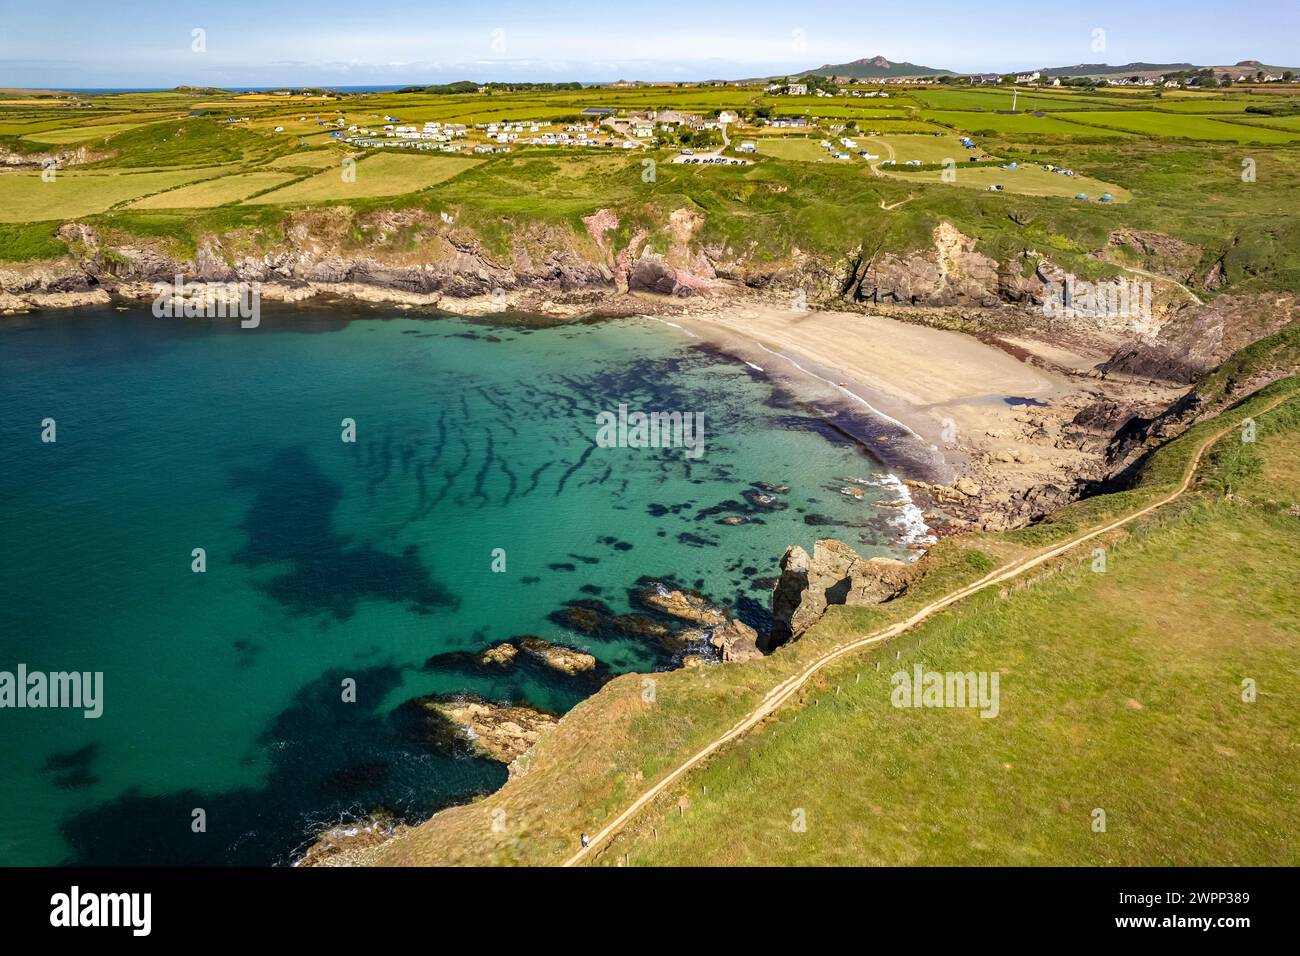 The beach at Caerfai Bay near St. Davids seen from the air, Wales, Great Britain, Europe Stock Photo